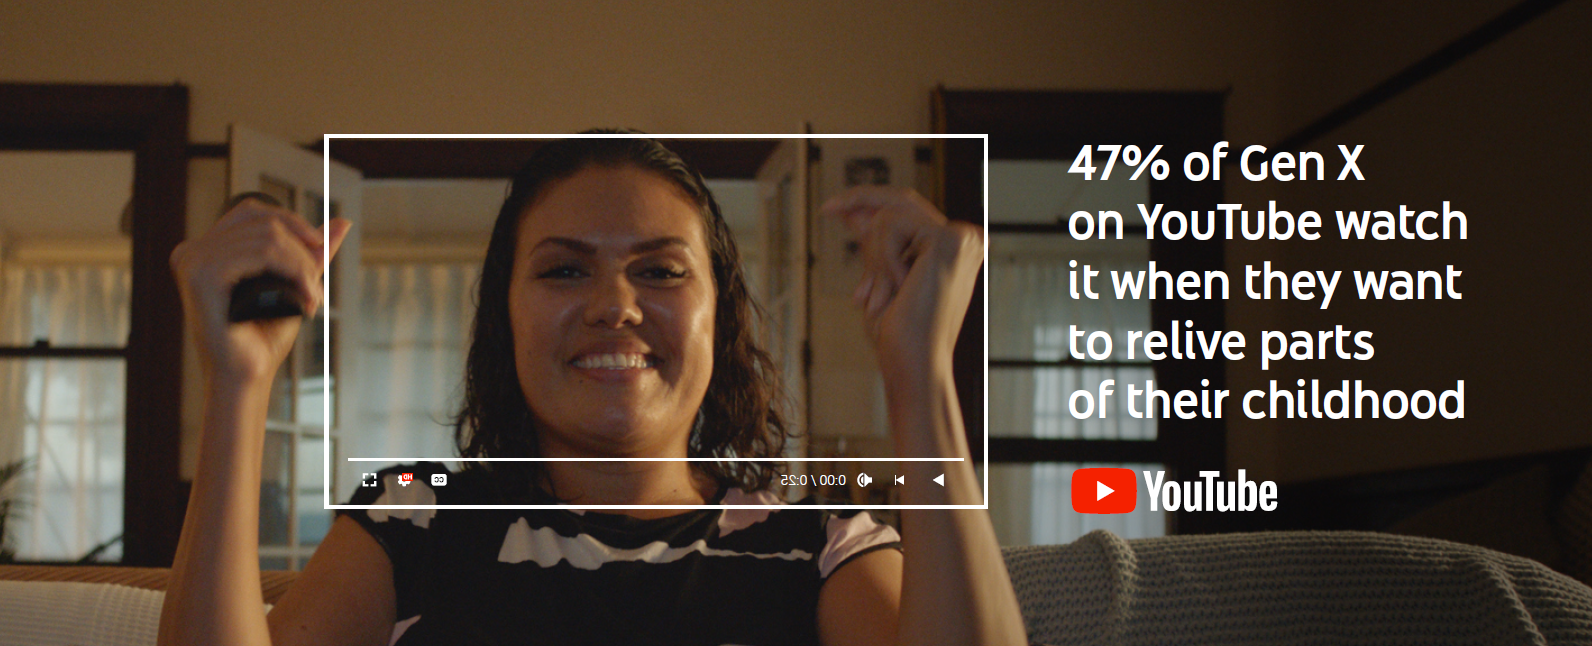 Video Marketing Series: Why YouTube is an essential part of Aussie Gen Xers' lives